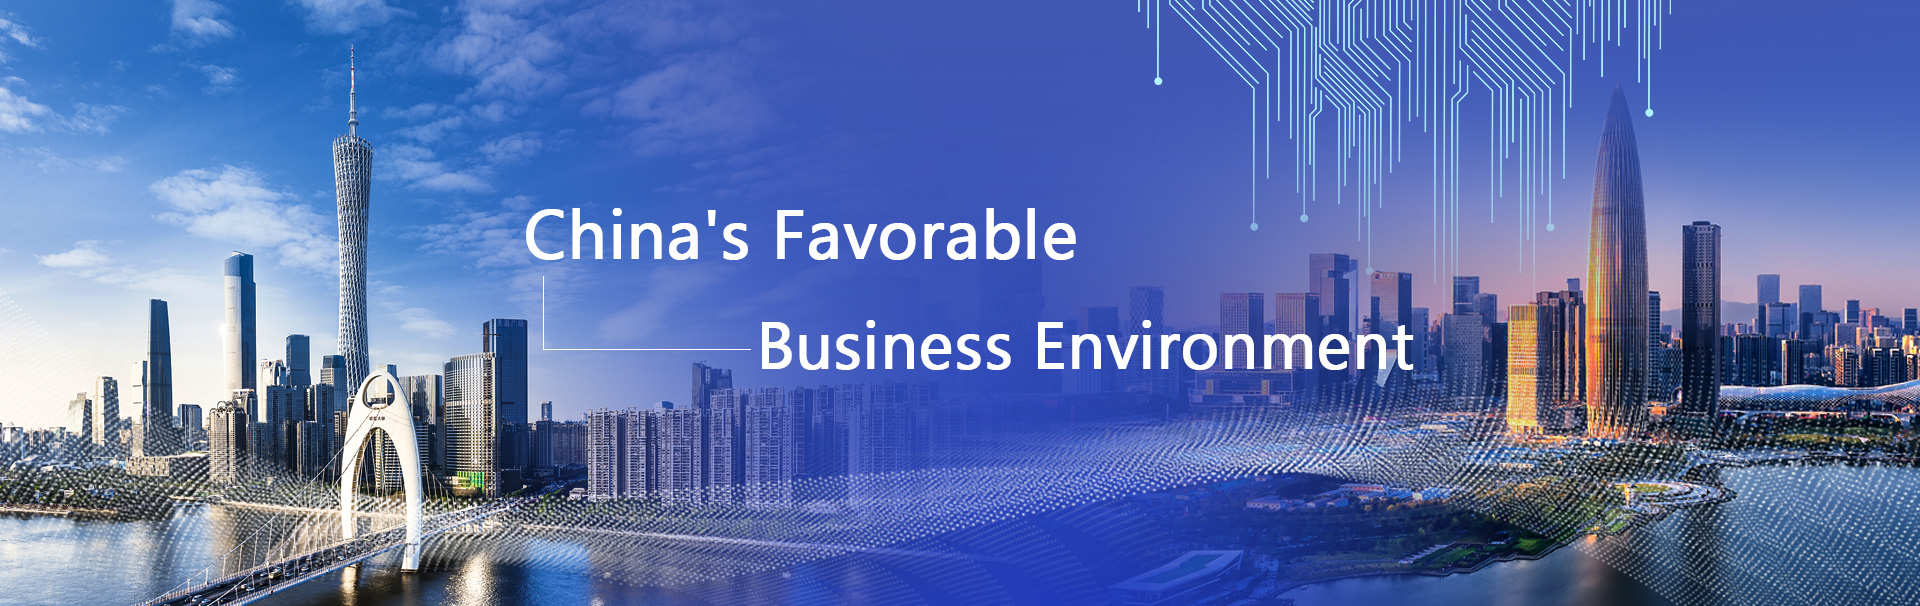 China's Favorable Business Environment